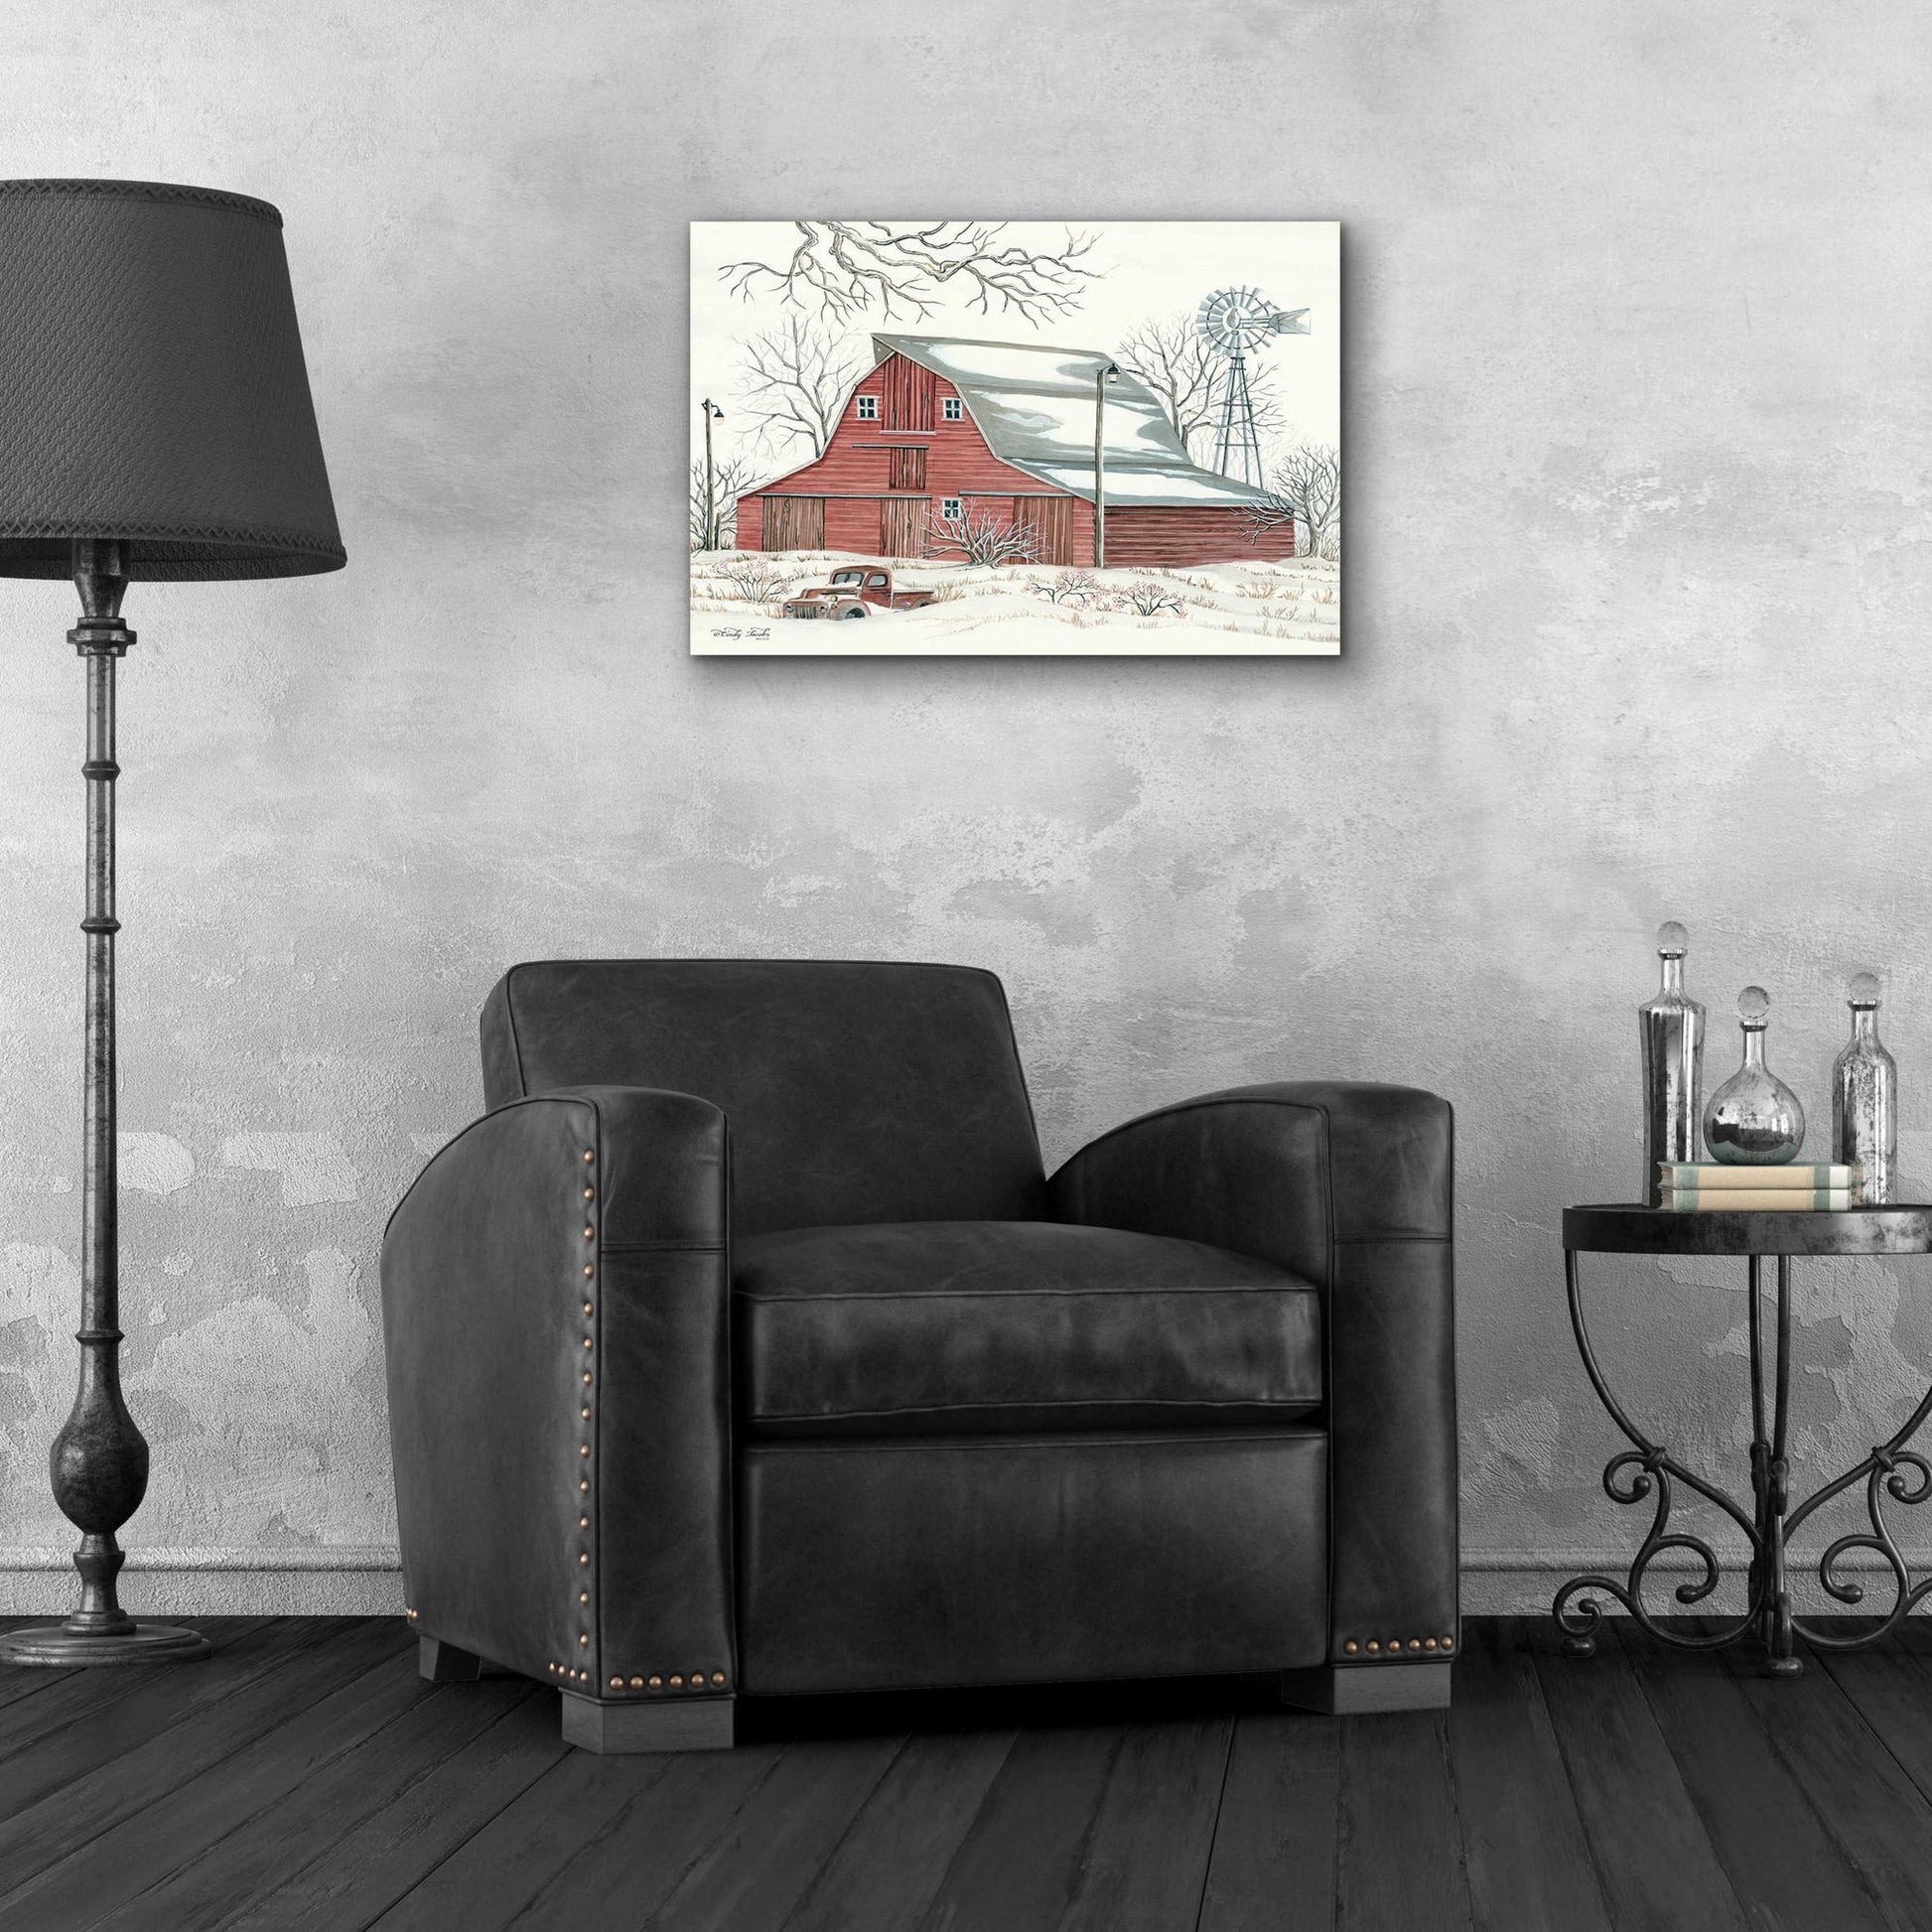 Epic Art 'Winter Barn with Pickup Truck' by Cindy Jacobs, Acrylic Glass Wall Art,24x16